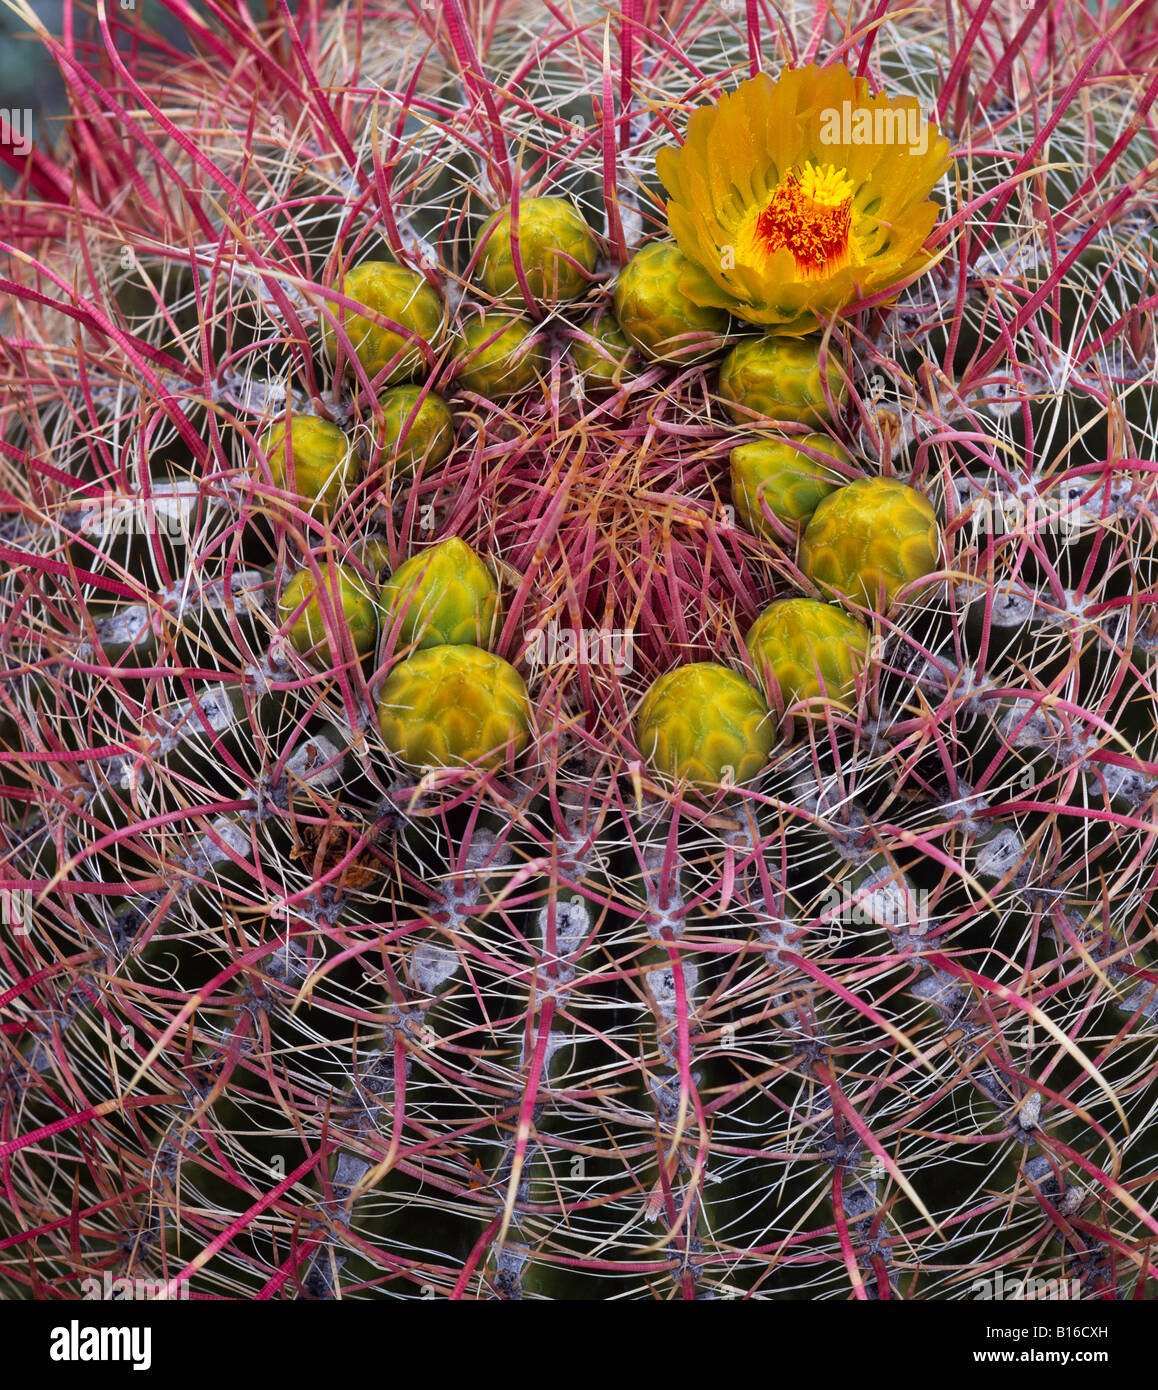 Anza Borrego Desert State Park CA Cluster of yellow blossoms on Barrel Cactus Ferocactus acanthodes with pink spines Stock Photo